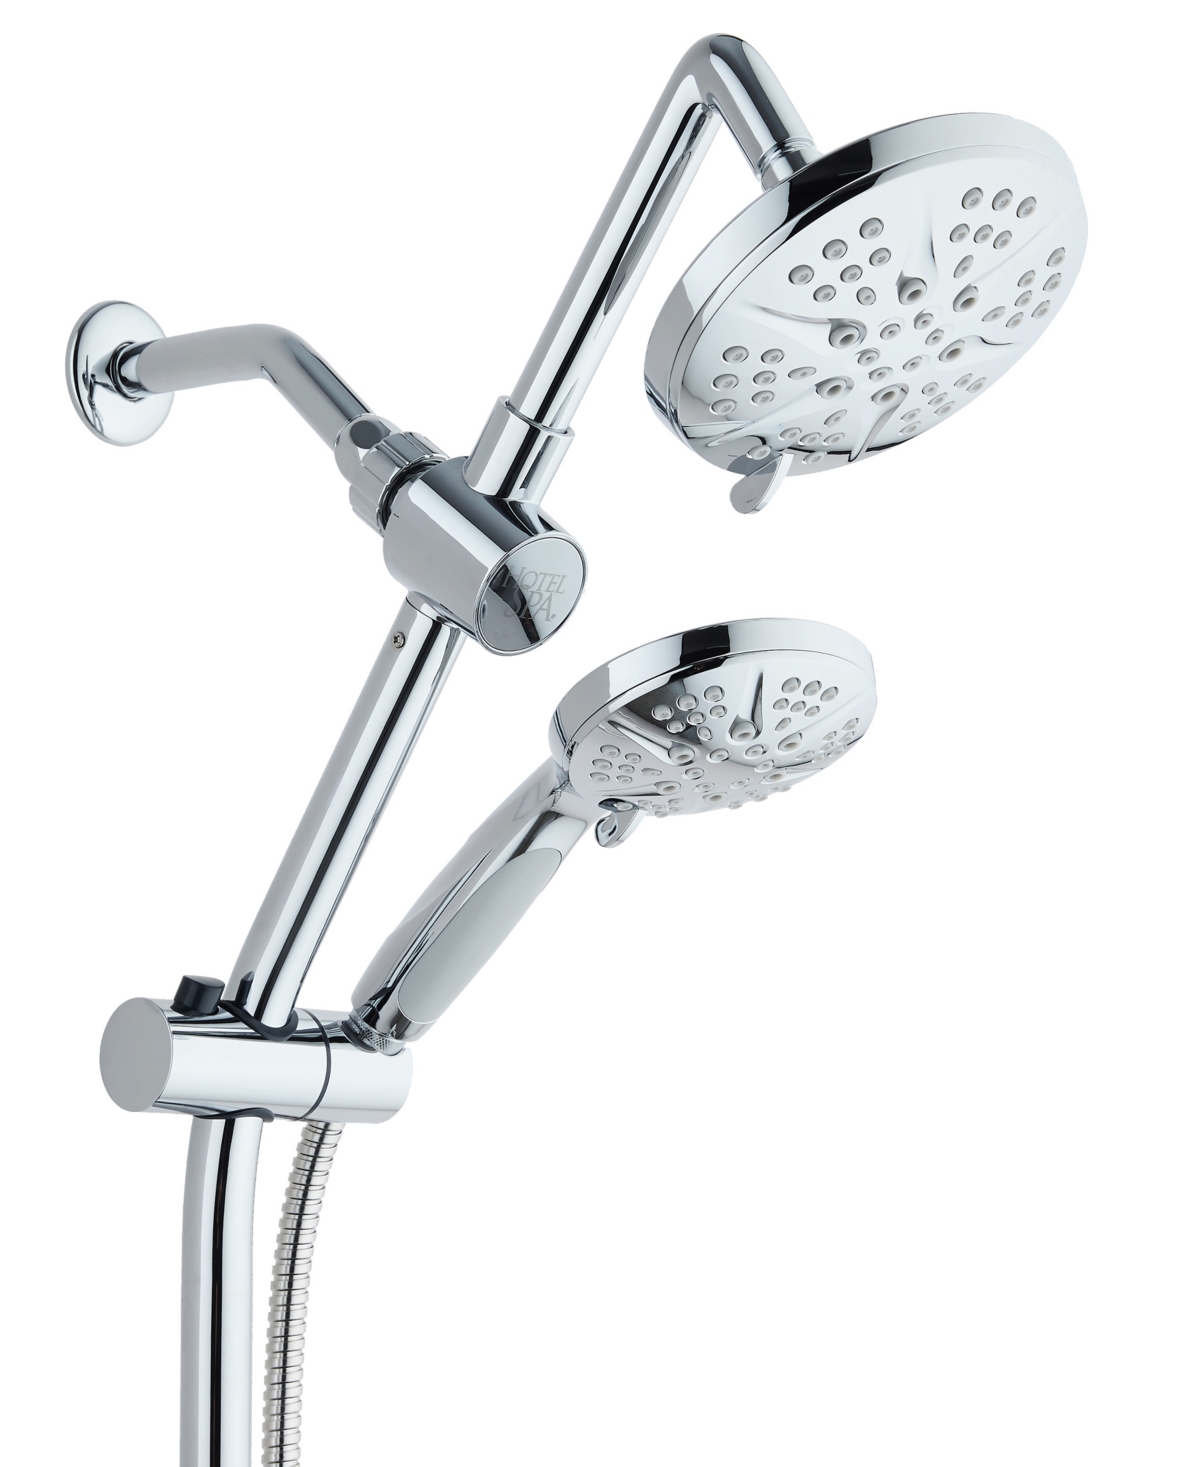 Adjustable Drill-Free Slide Bar with 48-setting Shower Head Combo and Height Extension Arm - Premium Chrome